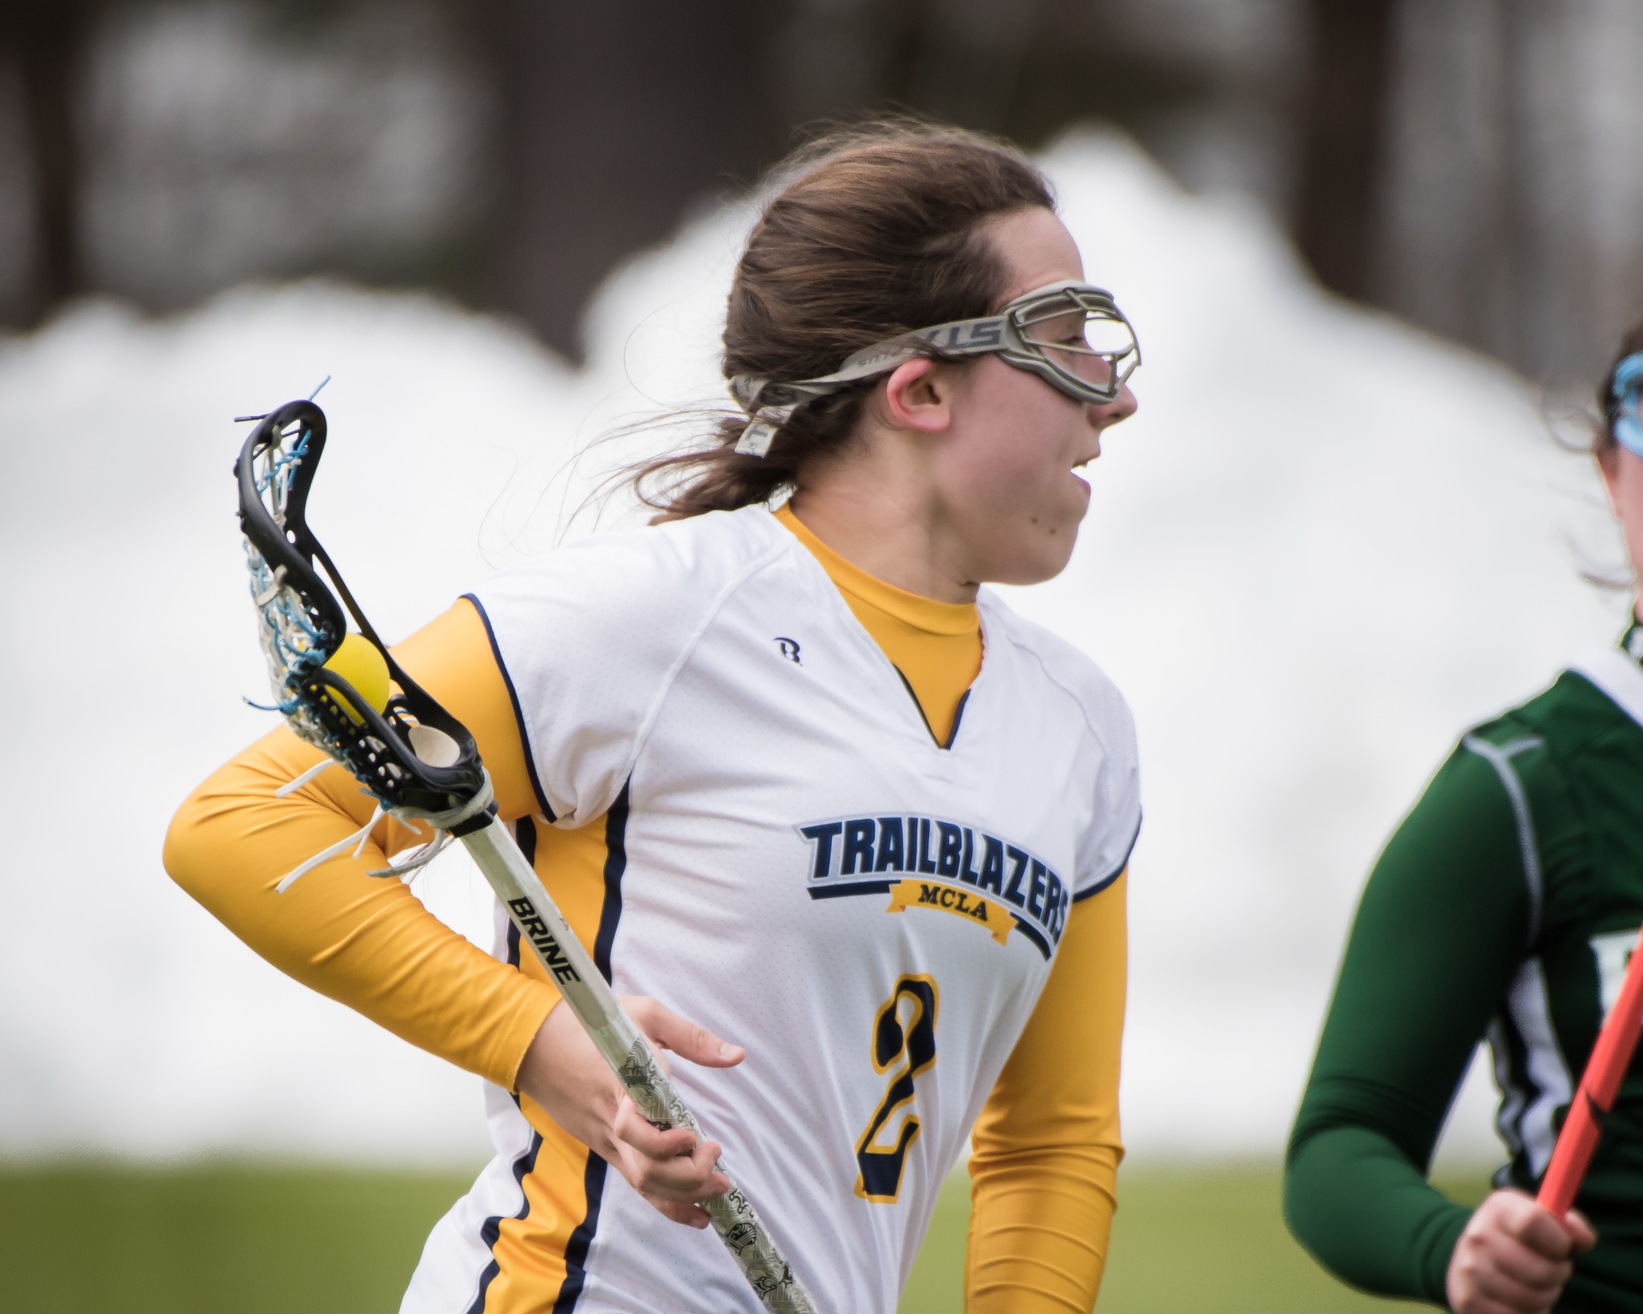 Trailblazers silenced by Lancers in women's lax 15-6